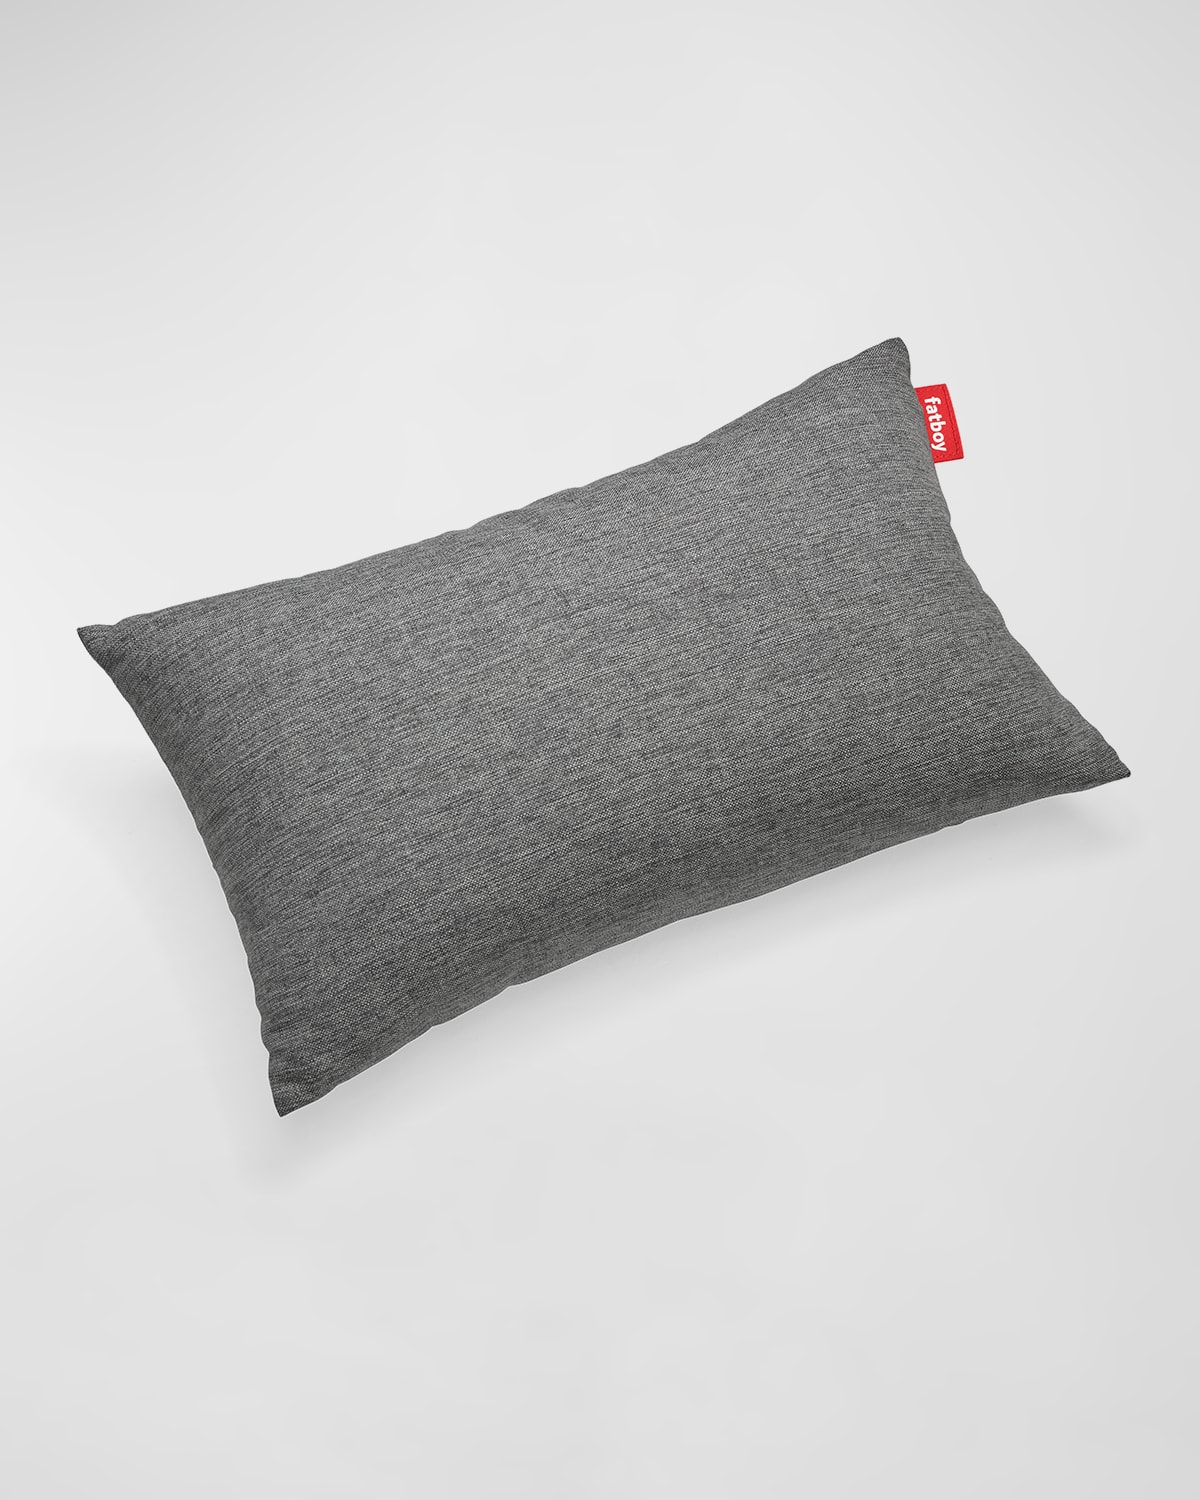 Fatboy Outdoor King Pillow In Rock Gray